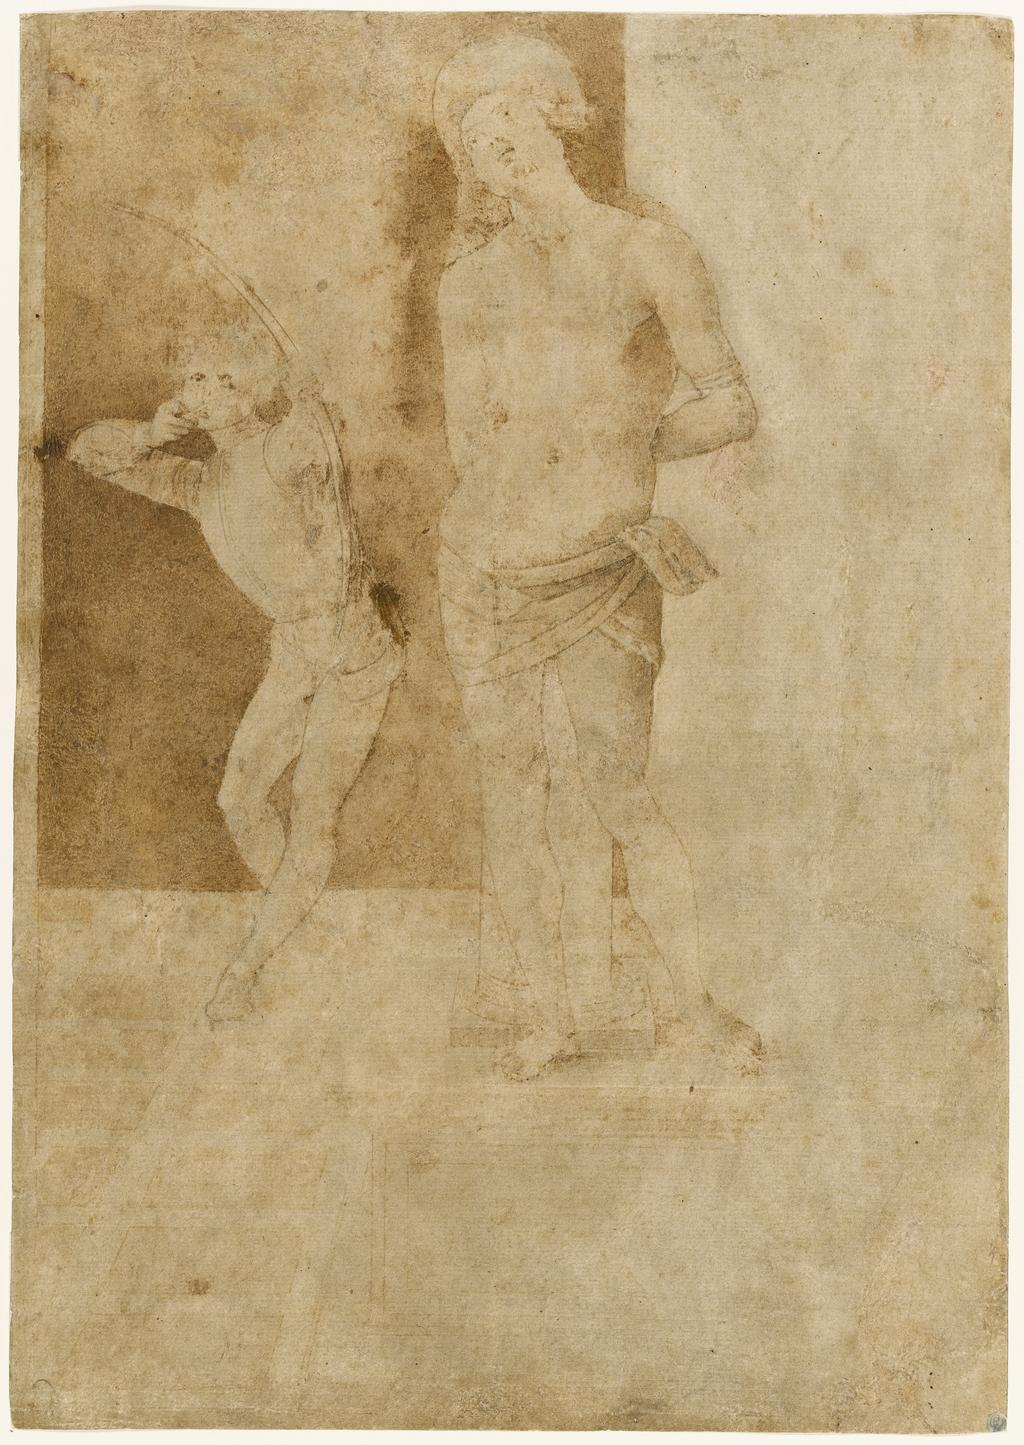 An image of Title/s: St Sebastian Maker/s: Perugino (Pietro di Cristoforo Vannucci) school of (draughtsman) [ULAN info: Italian artist, c.1450-1523]Technique Description: pen and bister much retouched by repairer, on paper, stuck down Dimensions: height: 320 mm, width: 225 mm